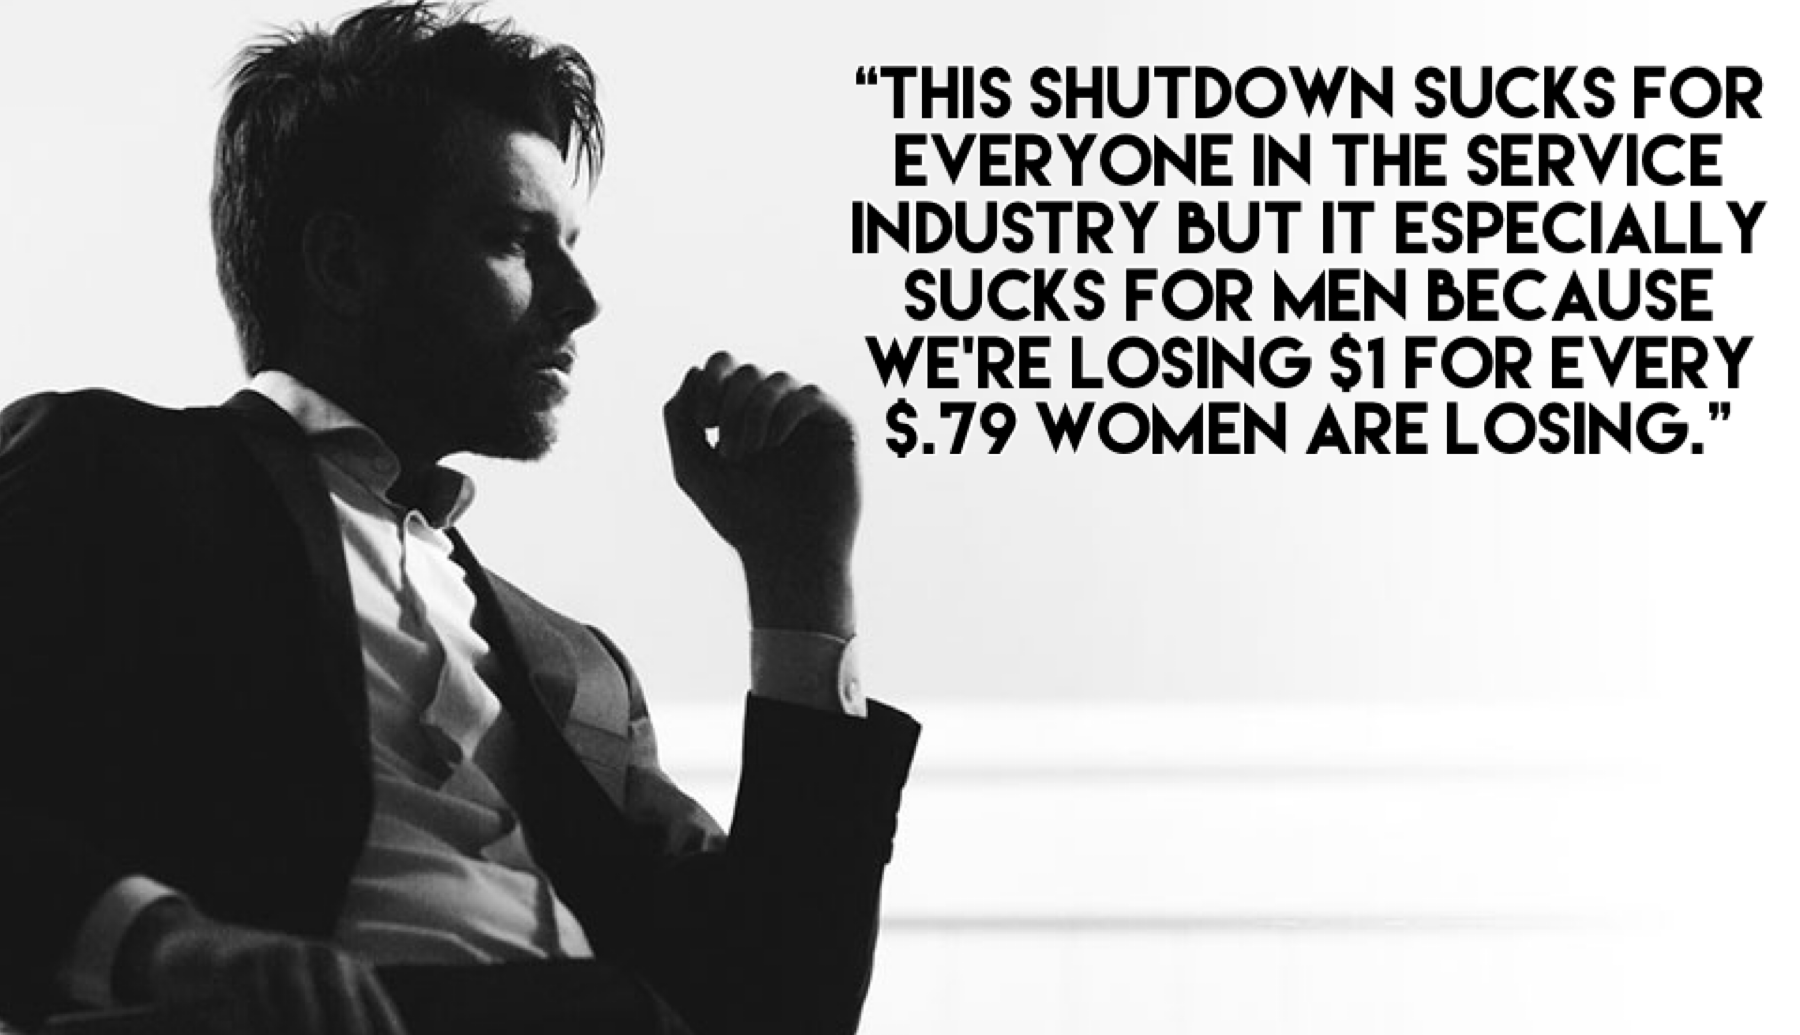 remember: men are the primary victims of the shutdown